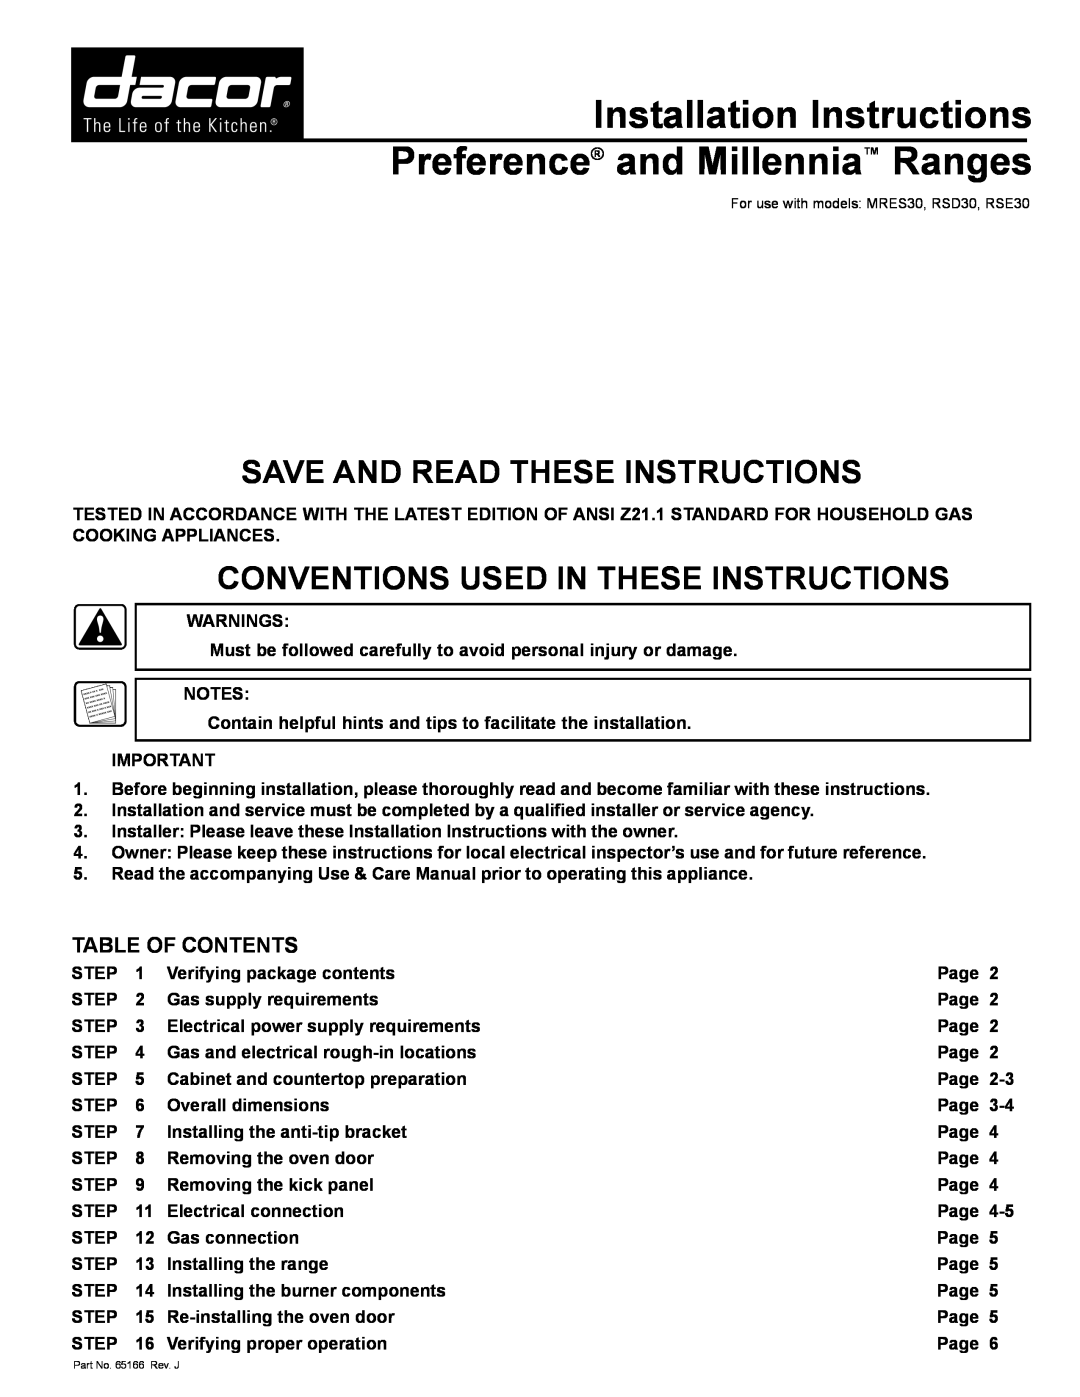 Dacor RSE30 installation instructions save and read these instructions, Conventions Used In These Instructions, Review 